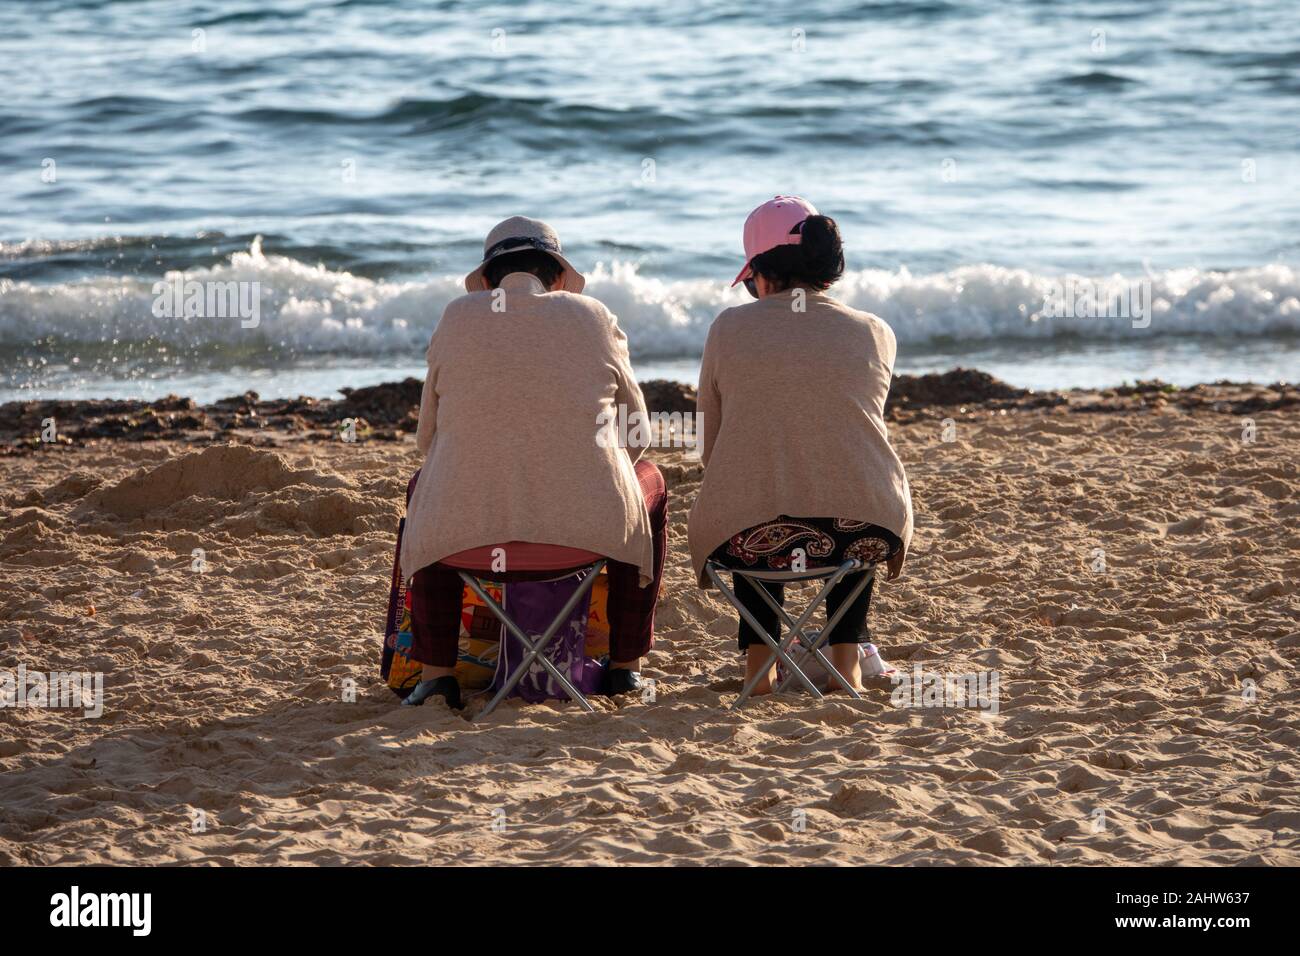 Benidorm, Alicante Province, Spain. 1st January 2020. Tourists and locals enjoy the warm, sunny weather on Levante beach on New Years Day. Two women sitting on small beach chairs with backs to camera. Credit: Mick Flynn/Alamy Live News Stock Photo